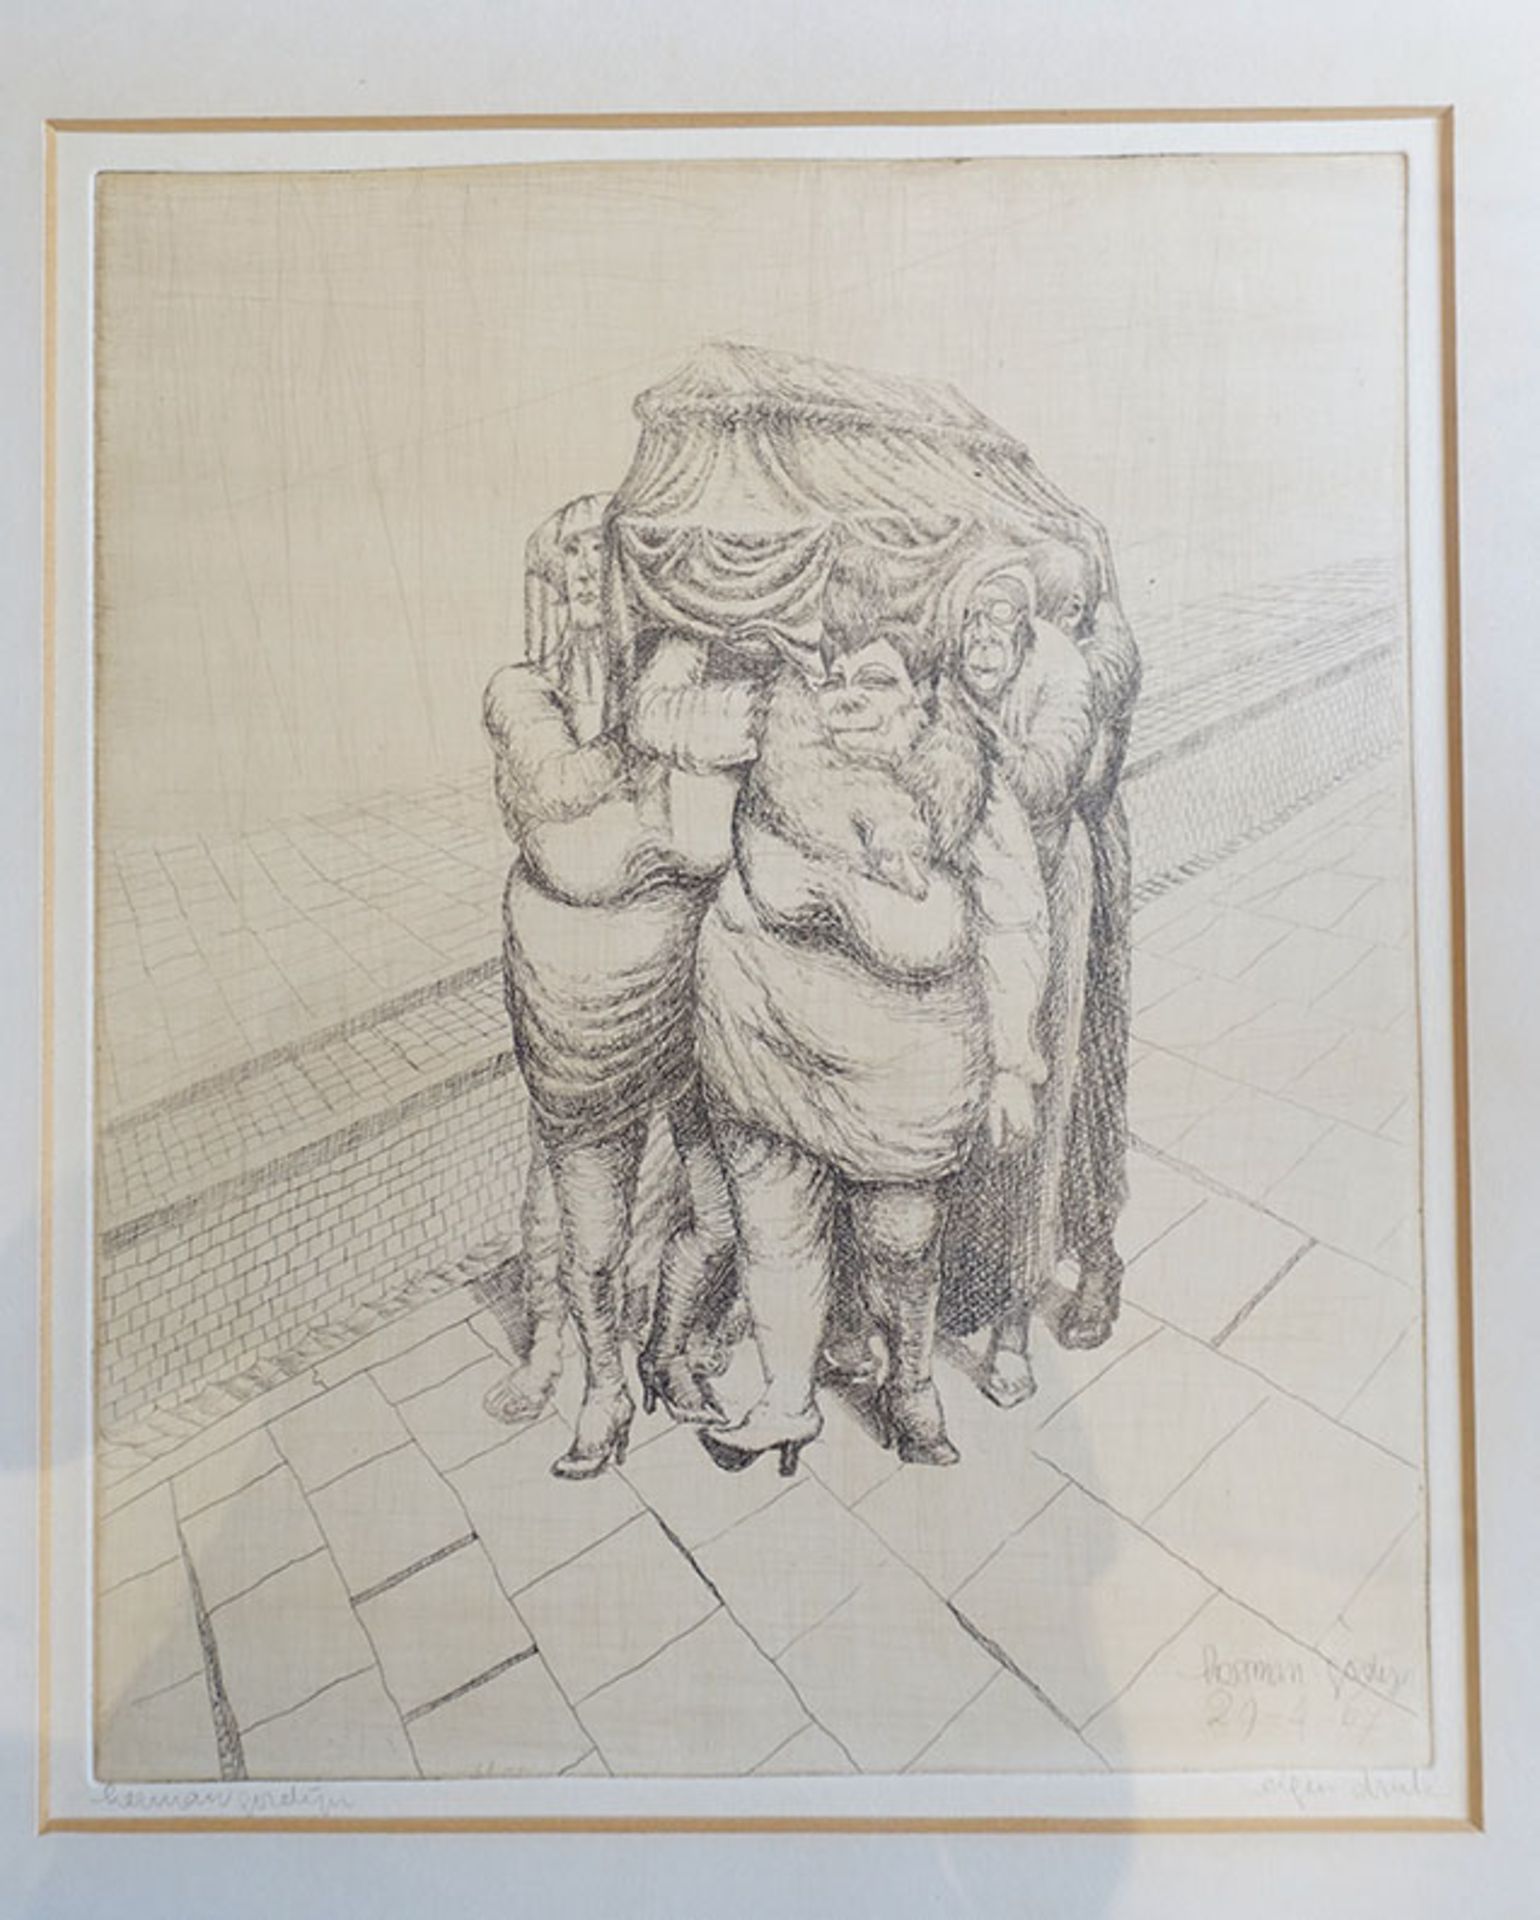 GORDIJN, Herman (1932-2017). "Begrafenis". 1967. Etching. 300 x 245 mm (image size). Signed by the